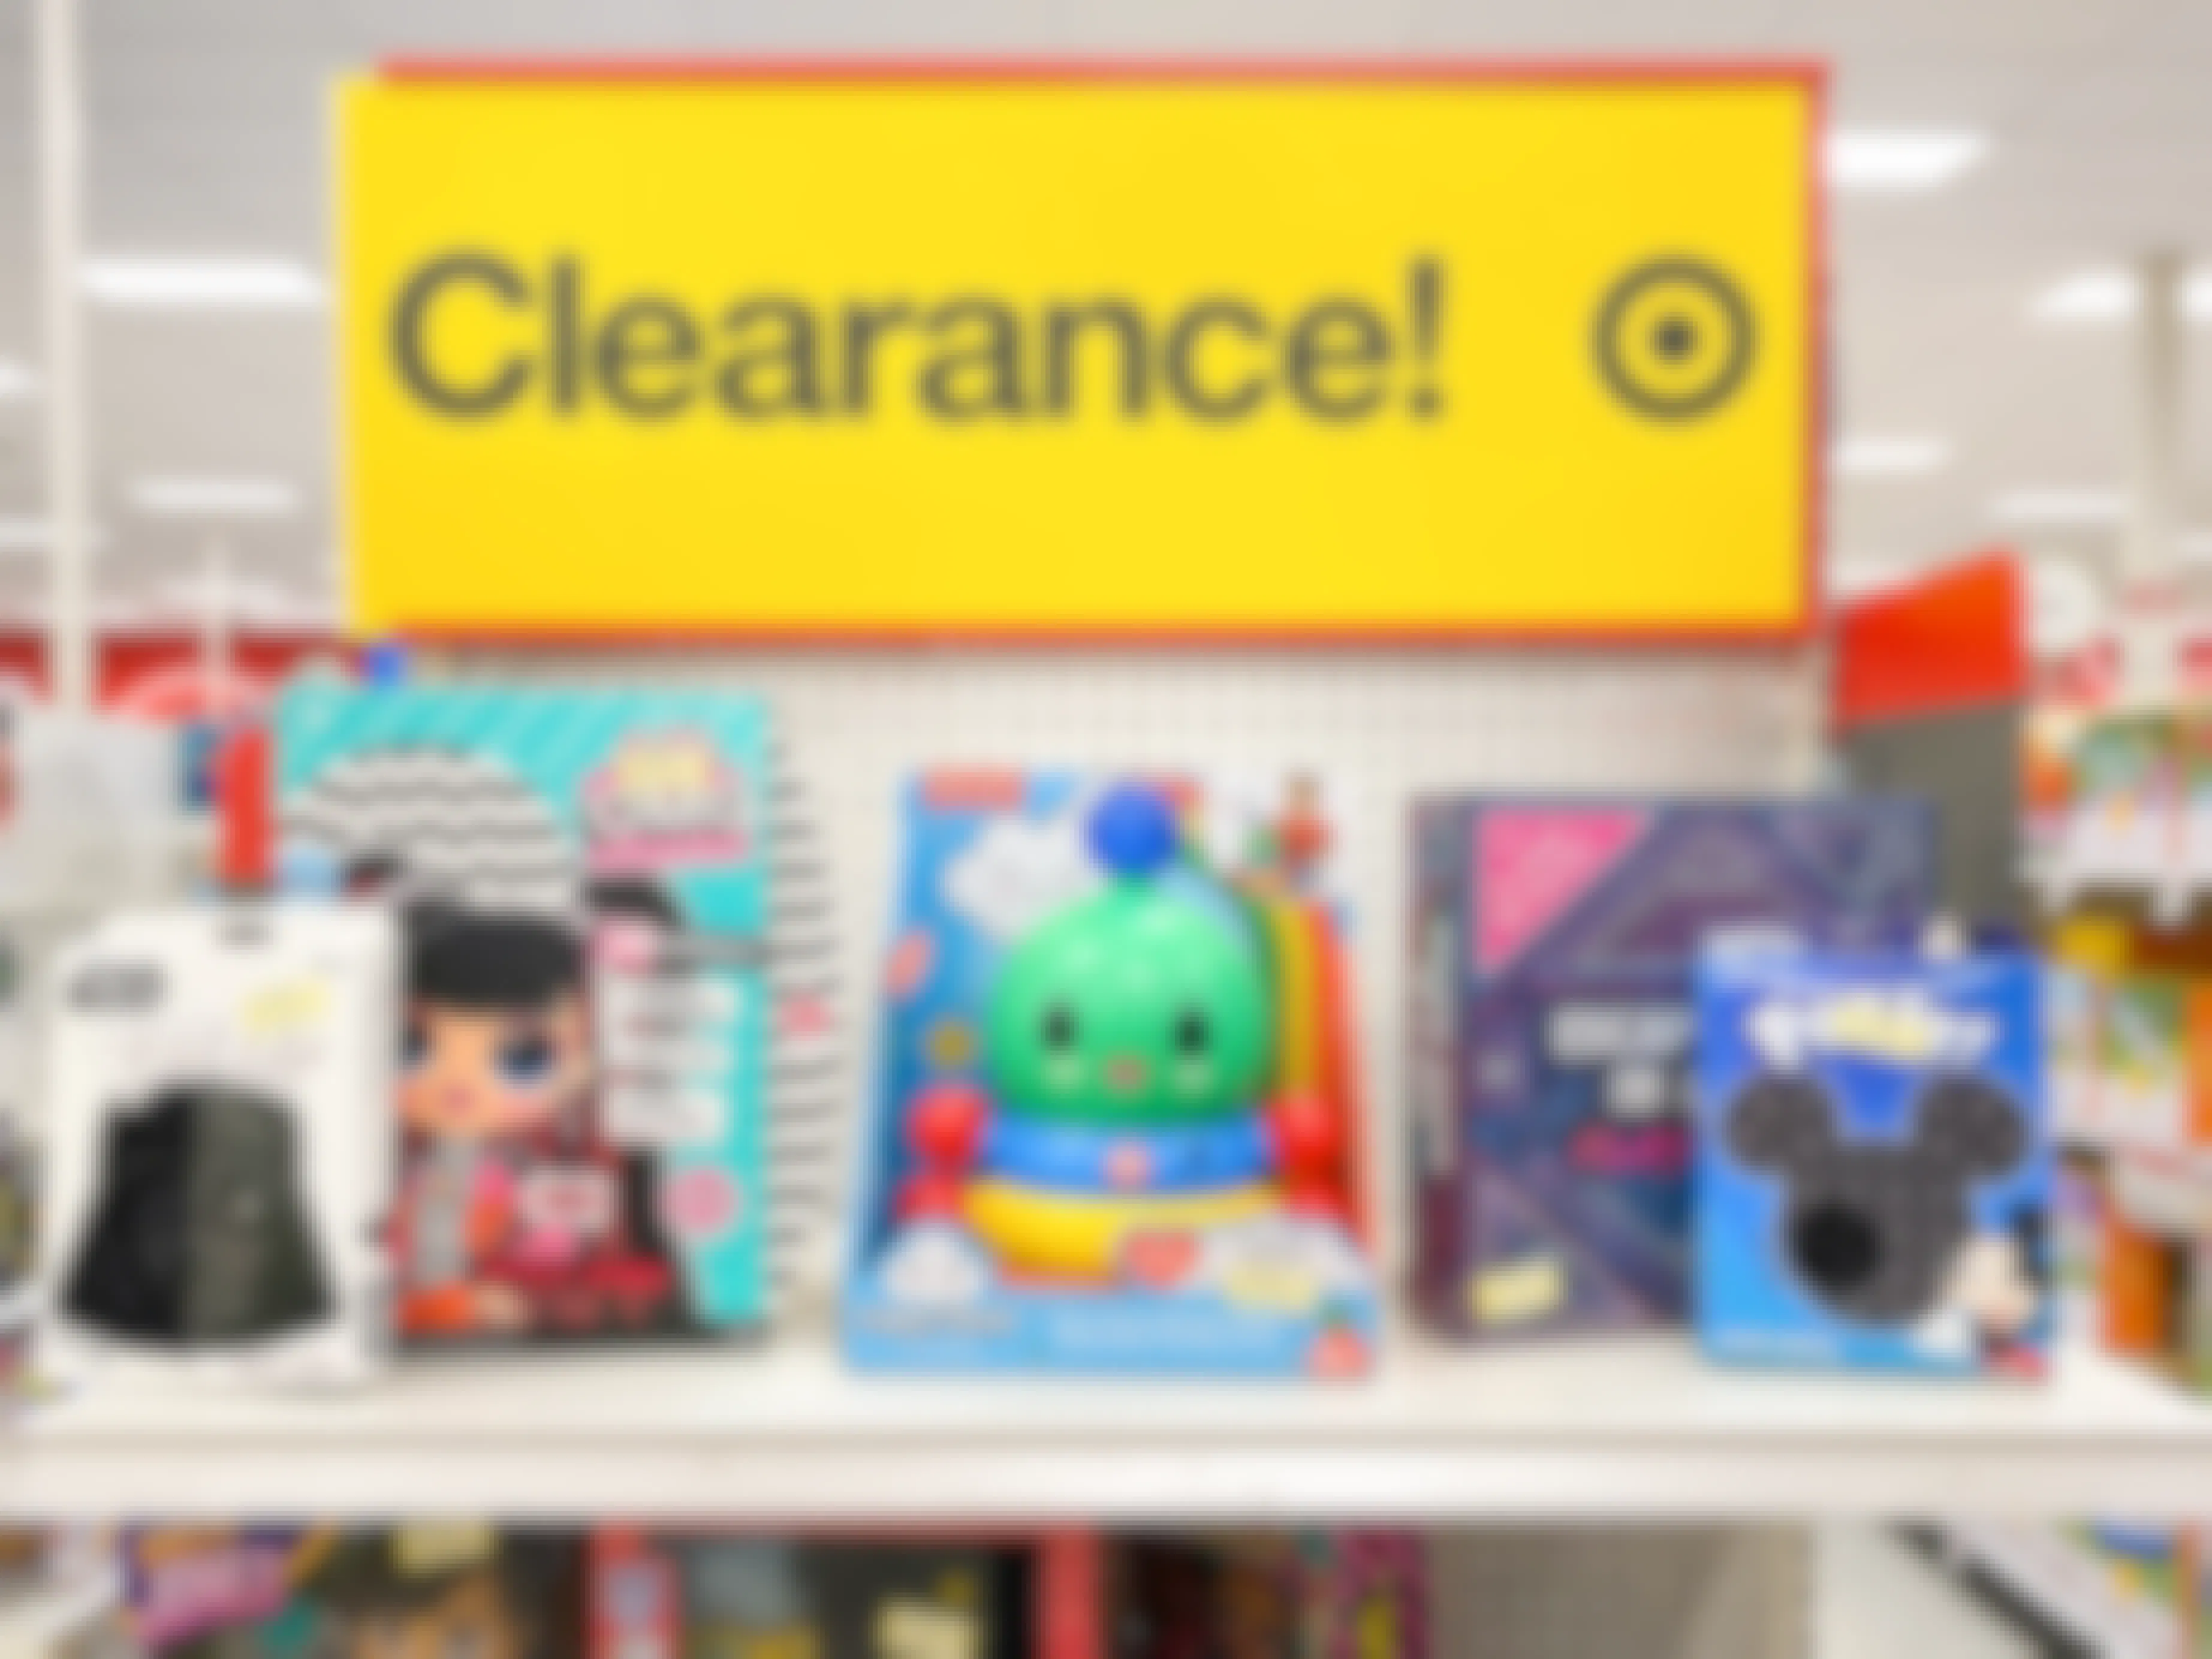 Your Ultimate Guide to the Clearance Sale Schedule for All the Top Stores